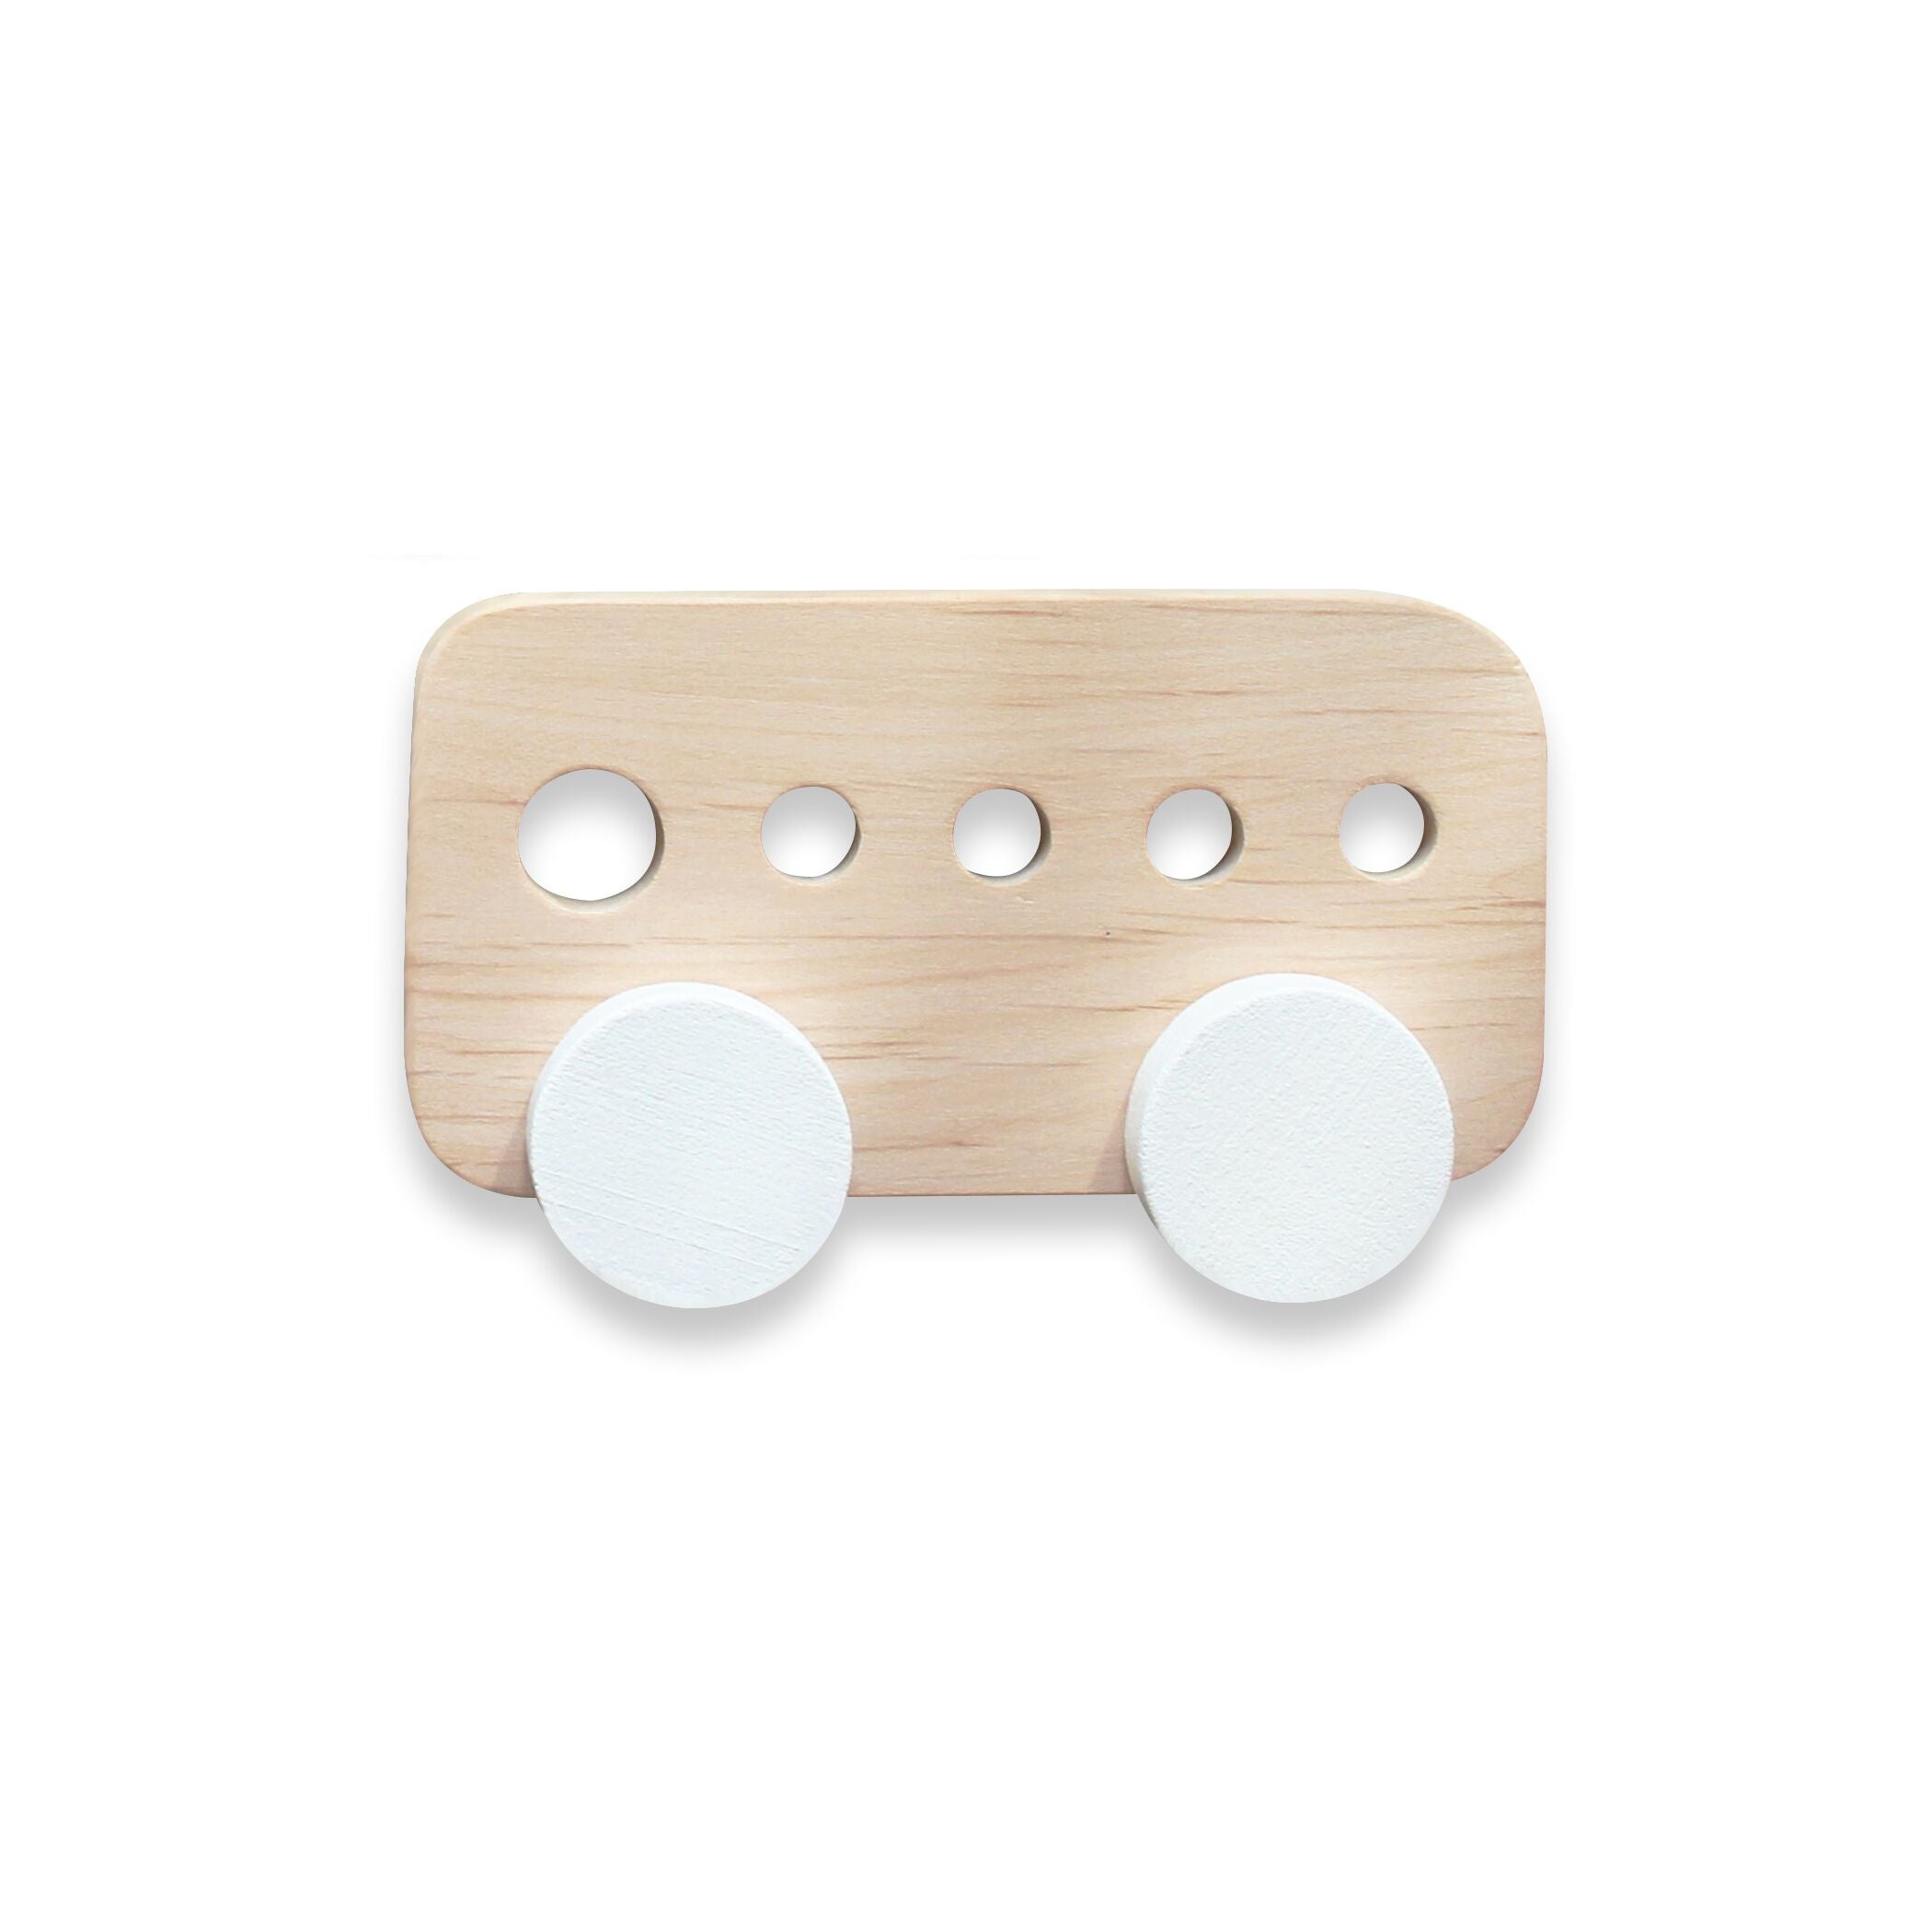 Wooden bus toy at Bonjour Baby Baskets, best baby gifts